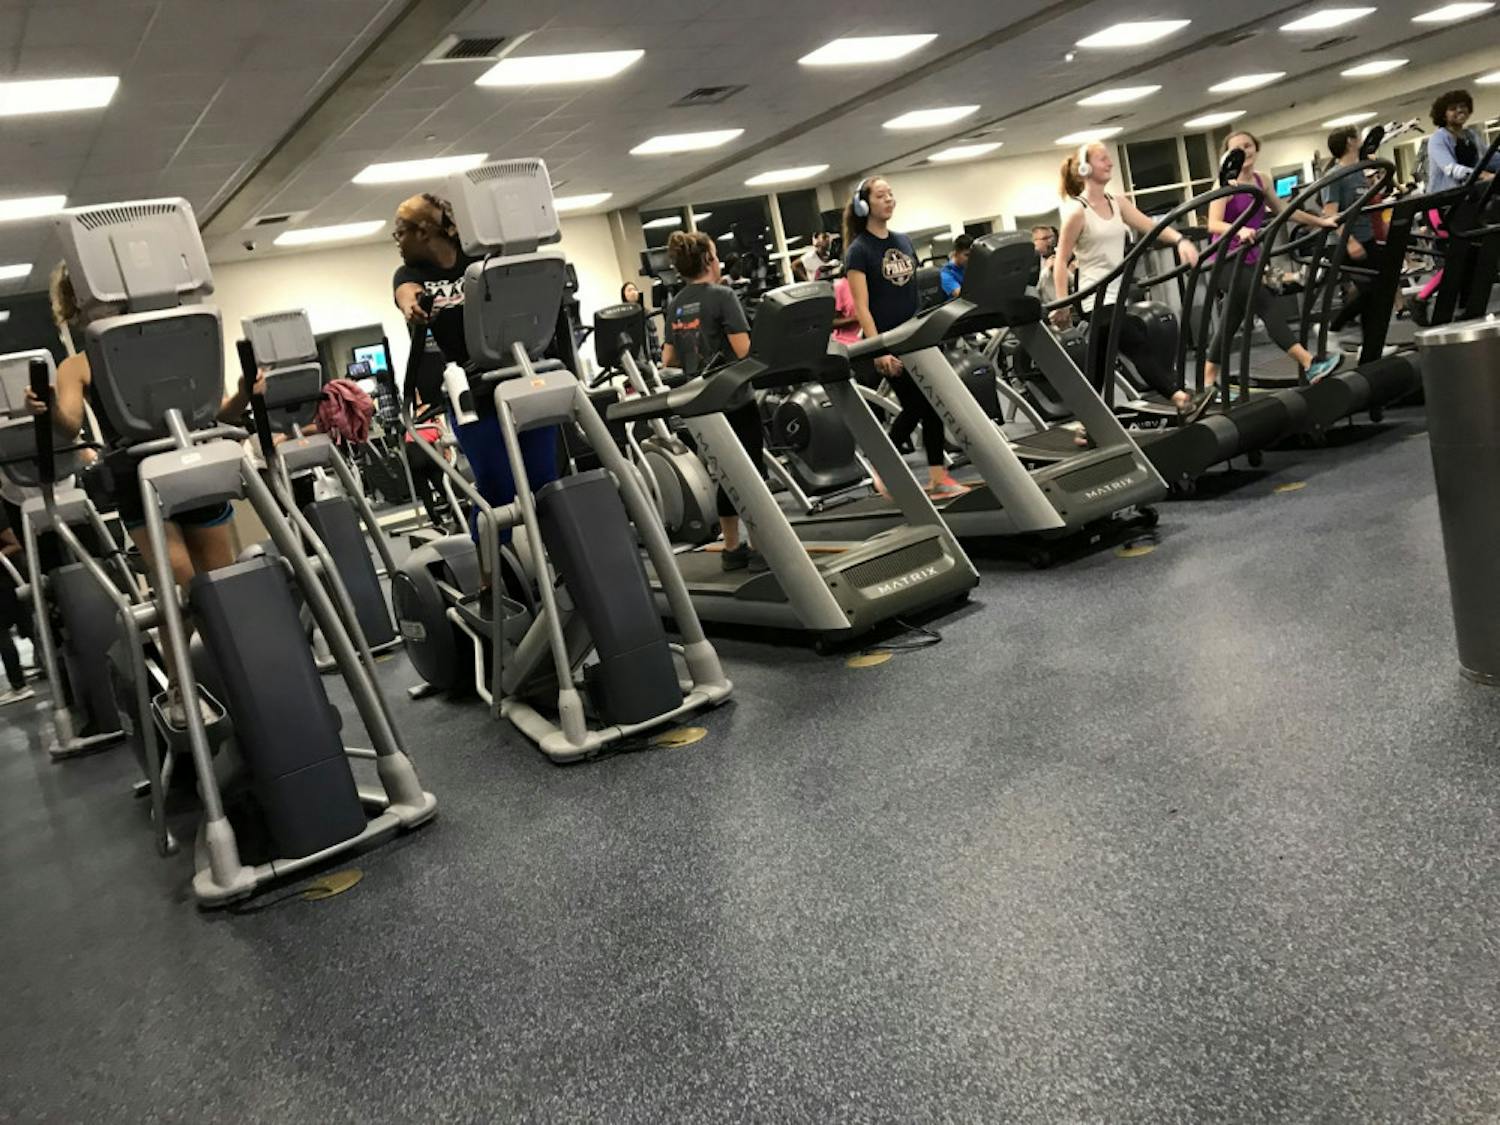 During the first week of spring semester, Student Recreation center is overflowing with students determined to keep their New Year's resolutions.